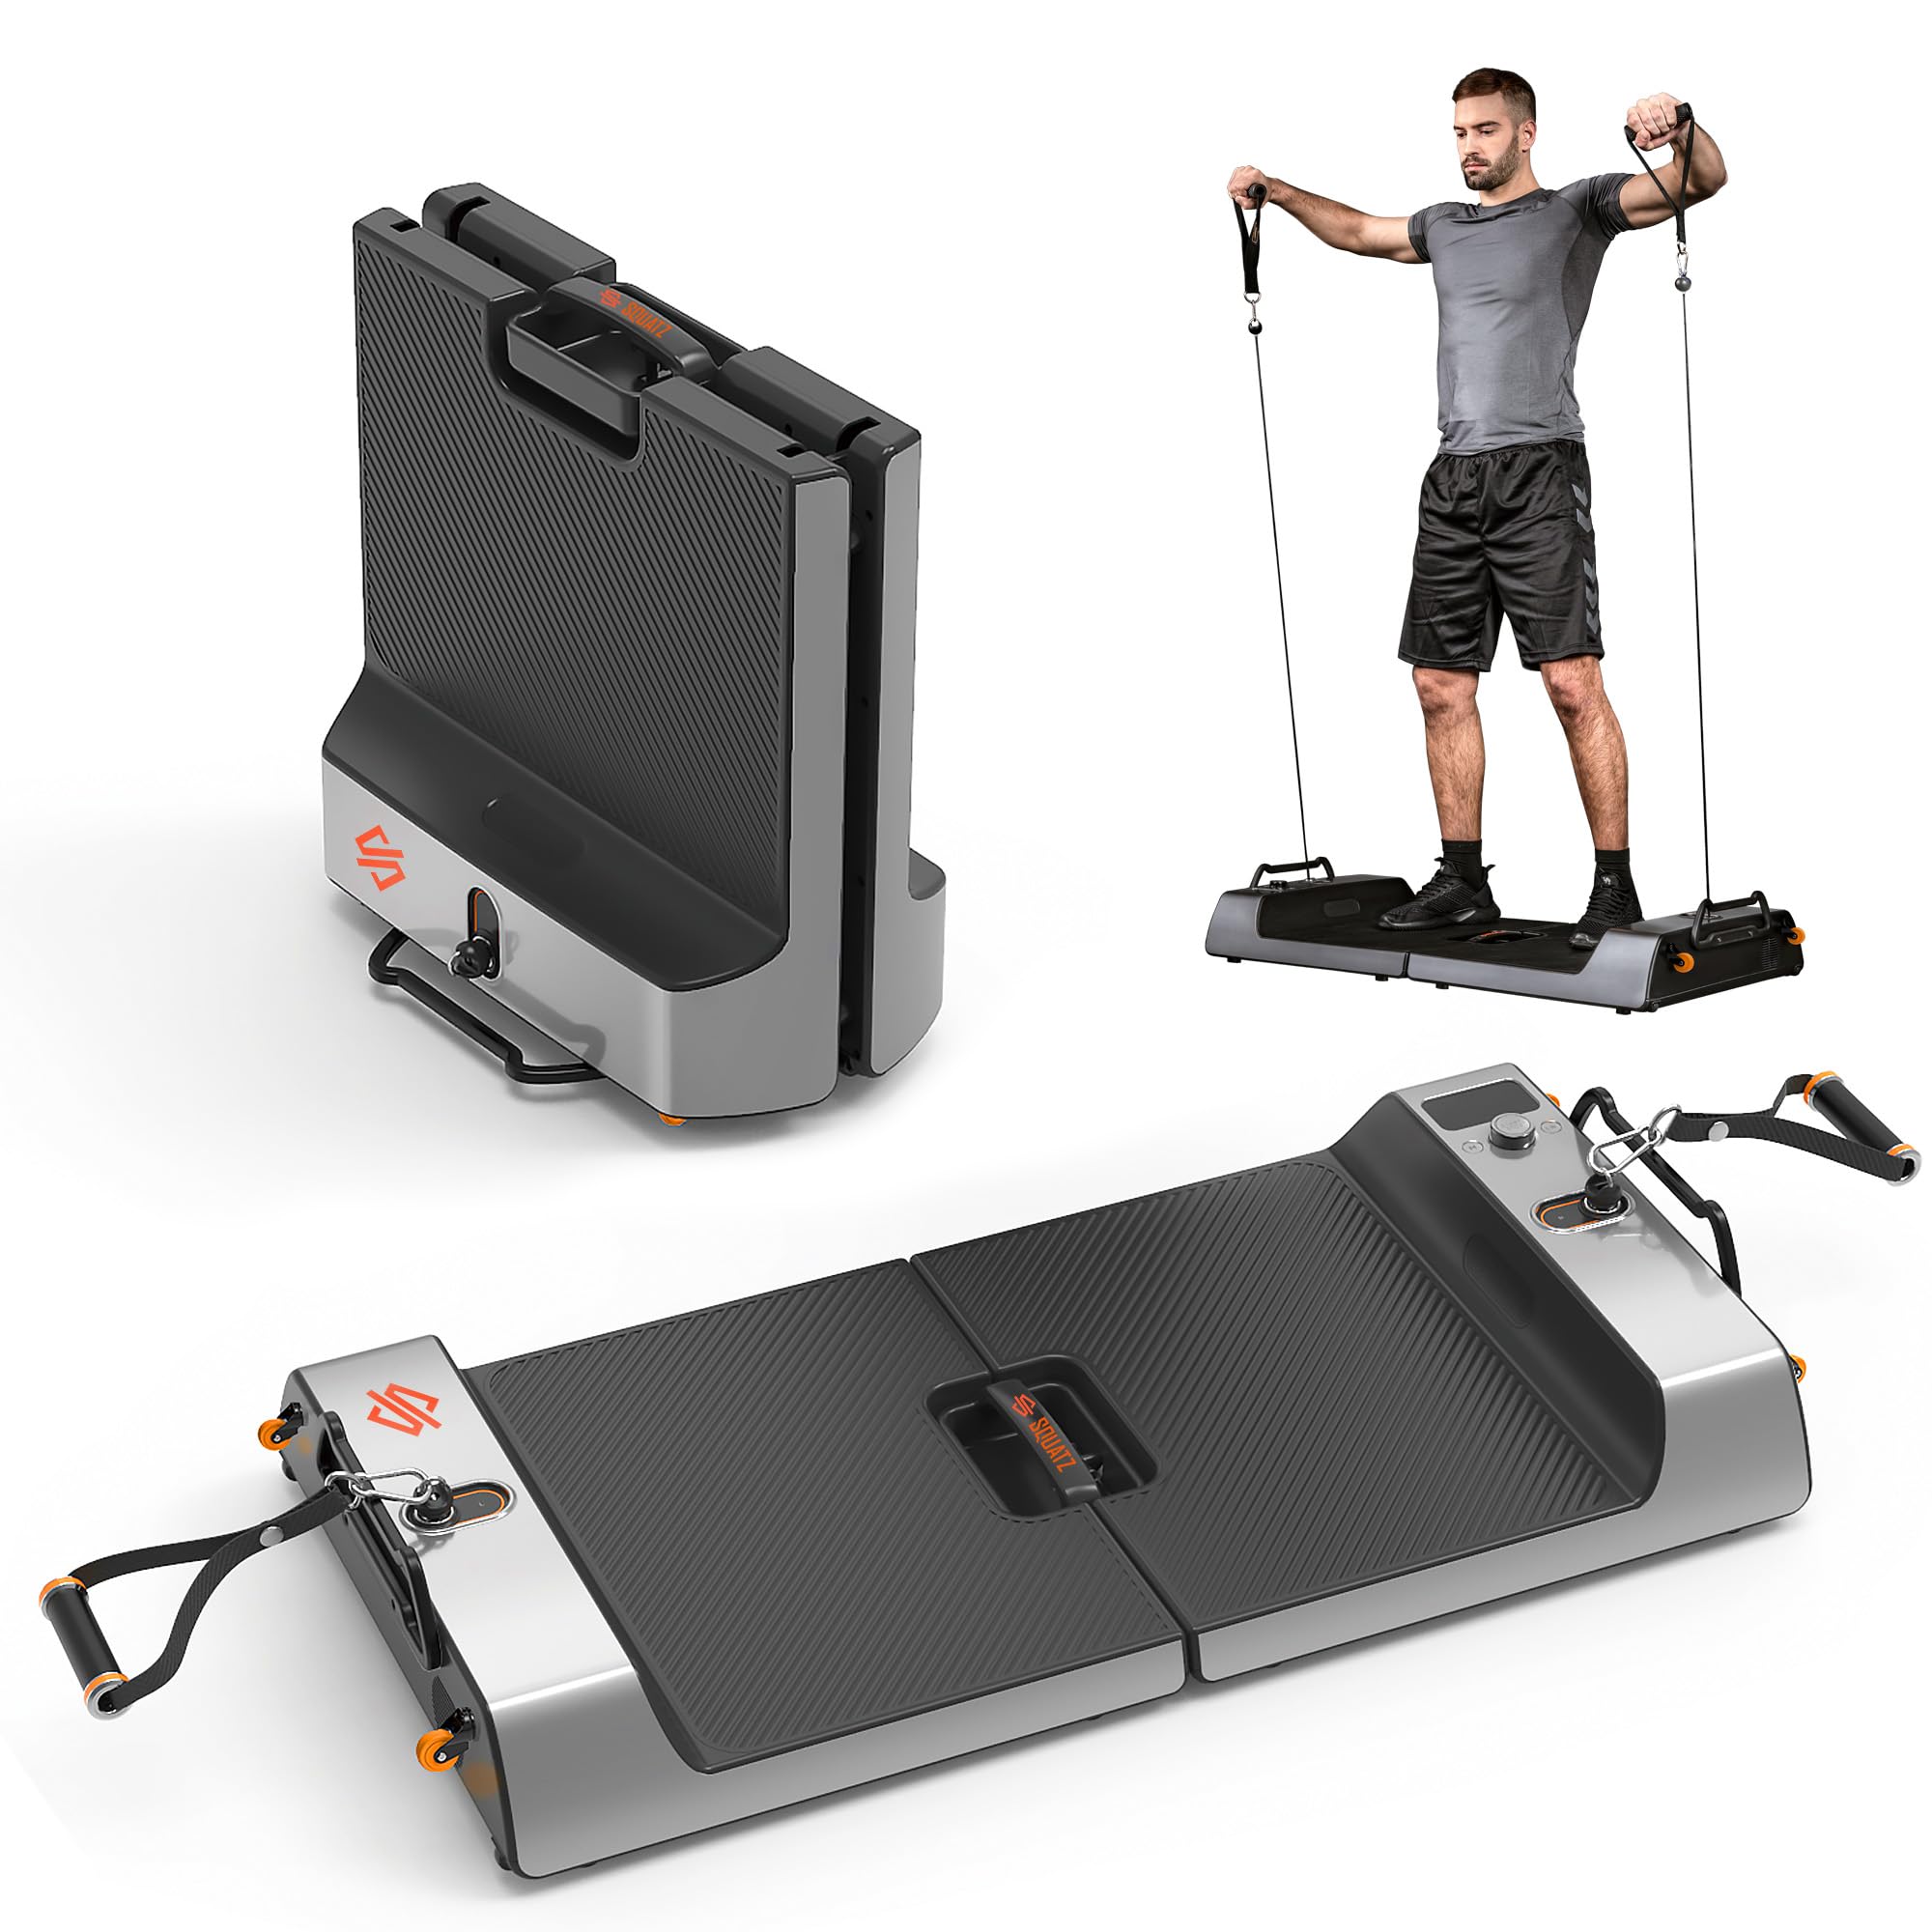 SQUATZ Apollo Board Gym, Version I 270 LBS Resistance, Foldable Multifunctional Workout Device with Standard, Eccentric, and Isokinetic Training Modes, Home Gym Equipment For Full Body Workouts